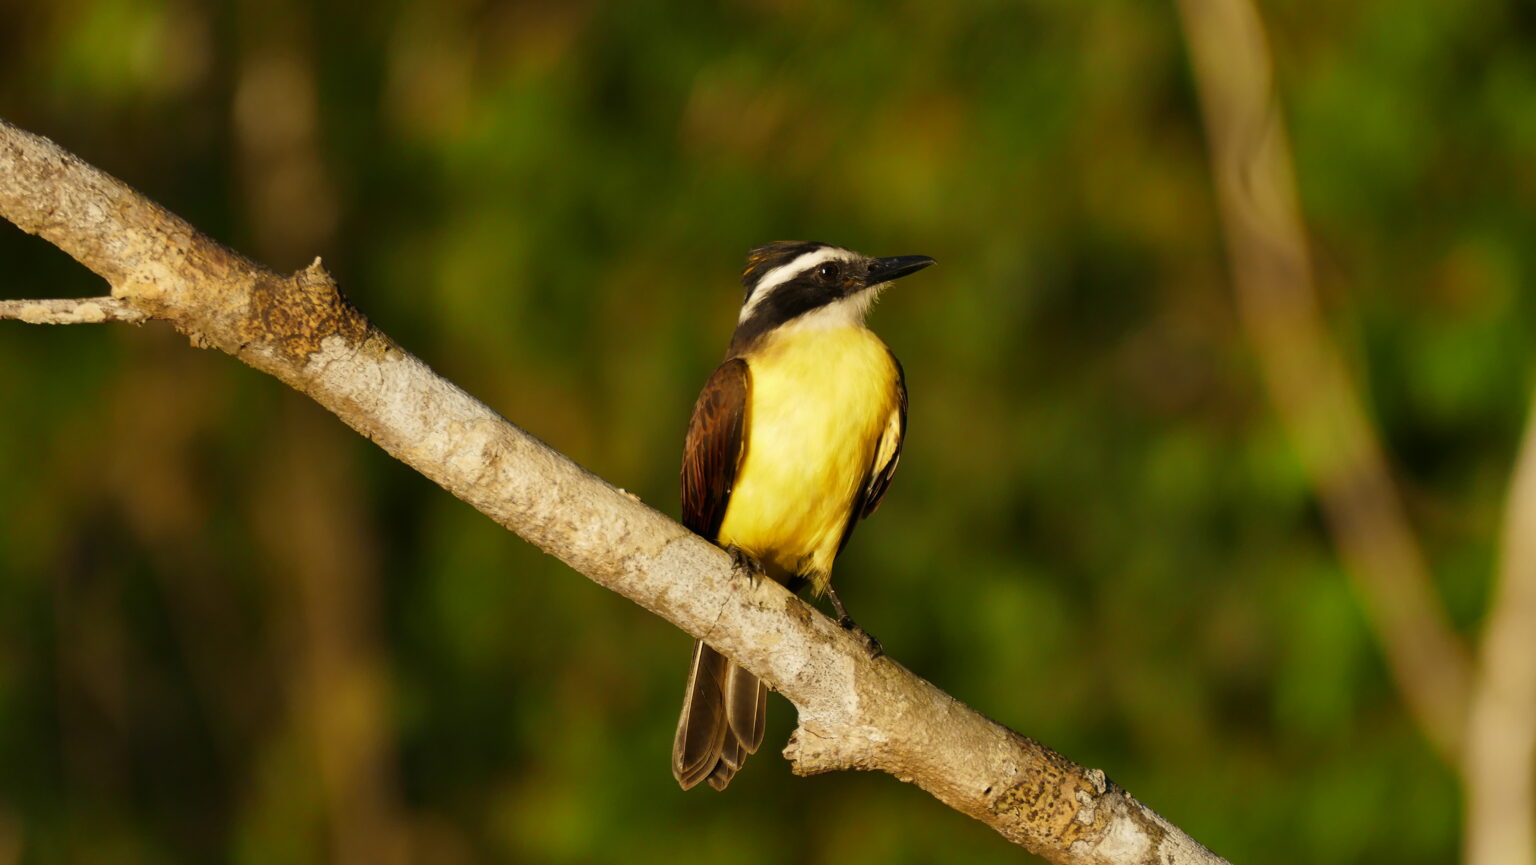 Yellow and black bird sitting on branch